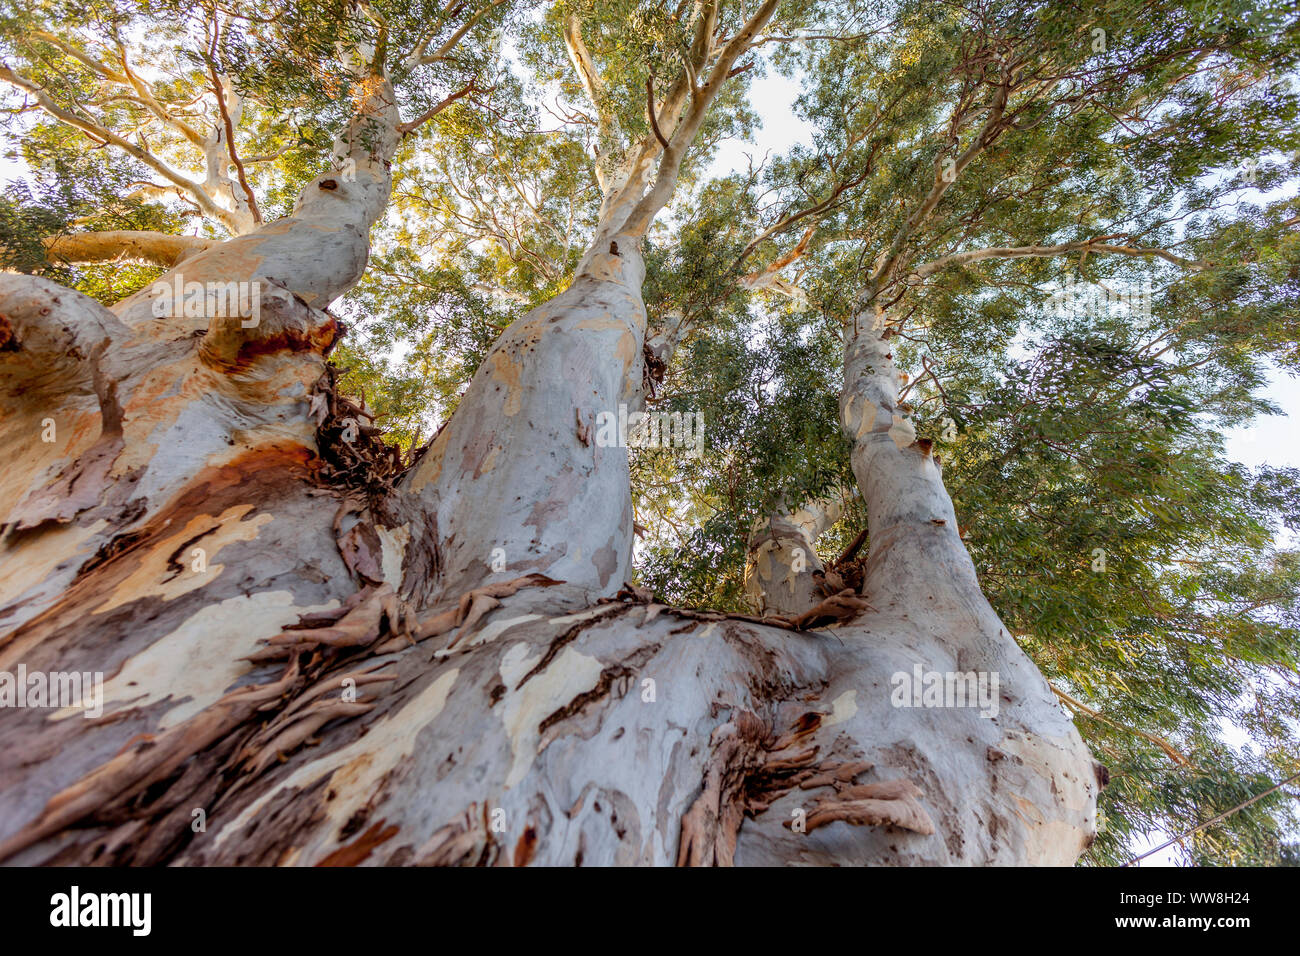 Eucalyptus tree in the city of Bodrum, Trunk is dividing up into three parallel trunks/ branches, Bodrum, Turkey, Stock Photo